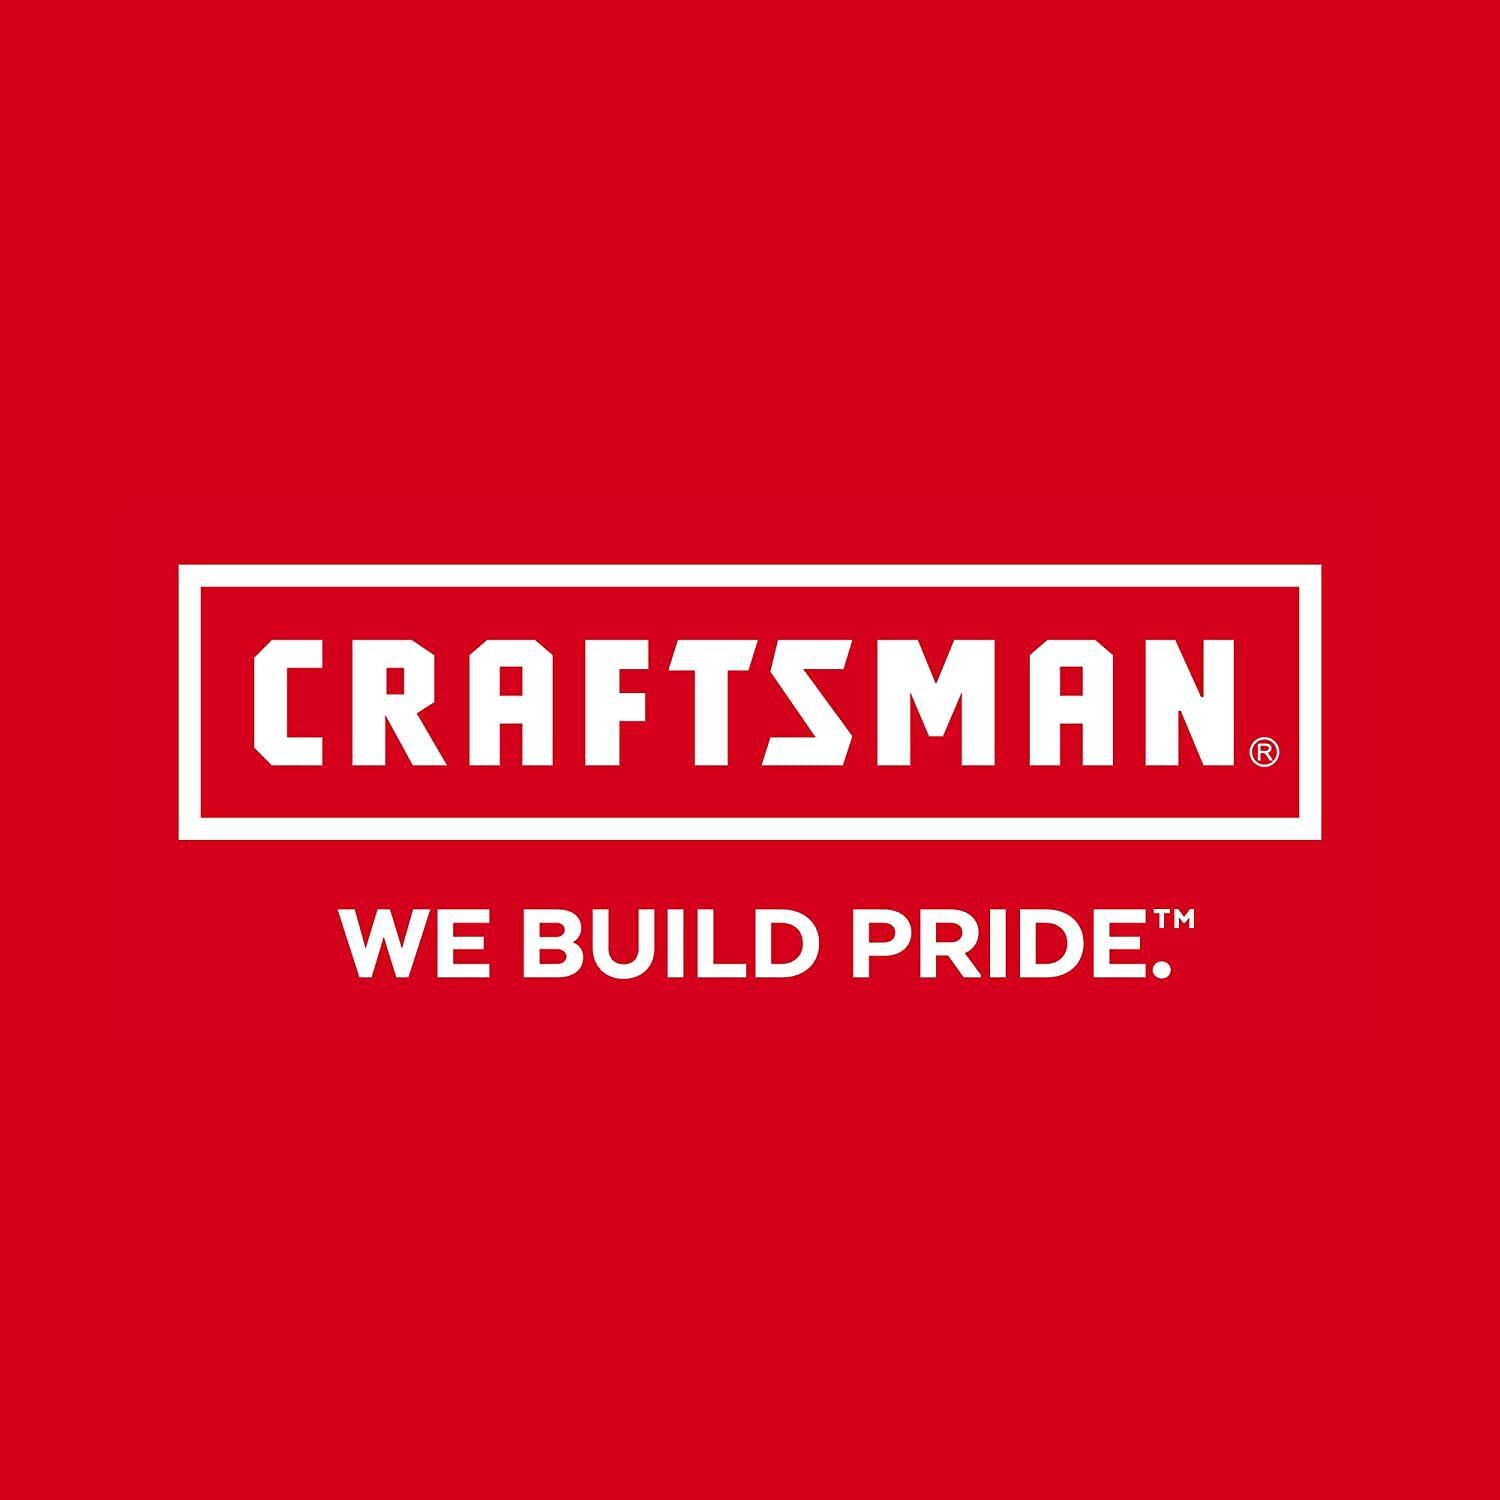 Graphic of CRAFTSMAN Power Train highlighting product features